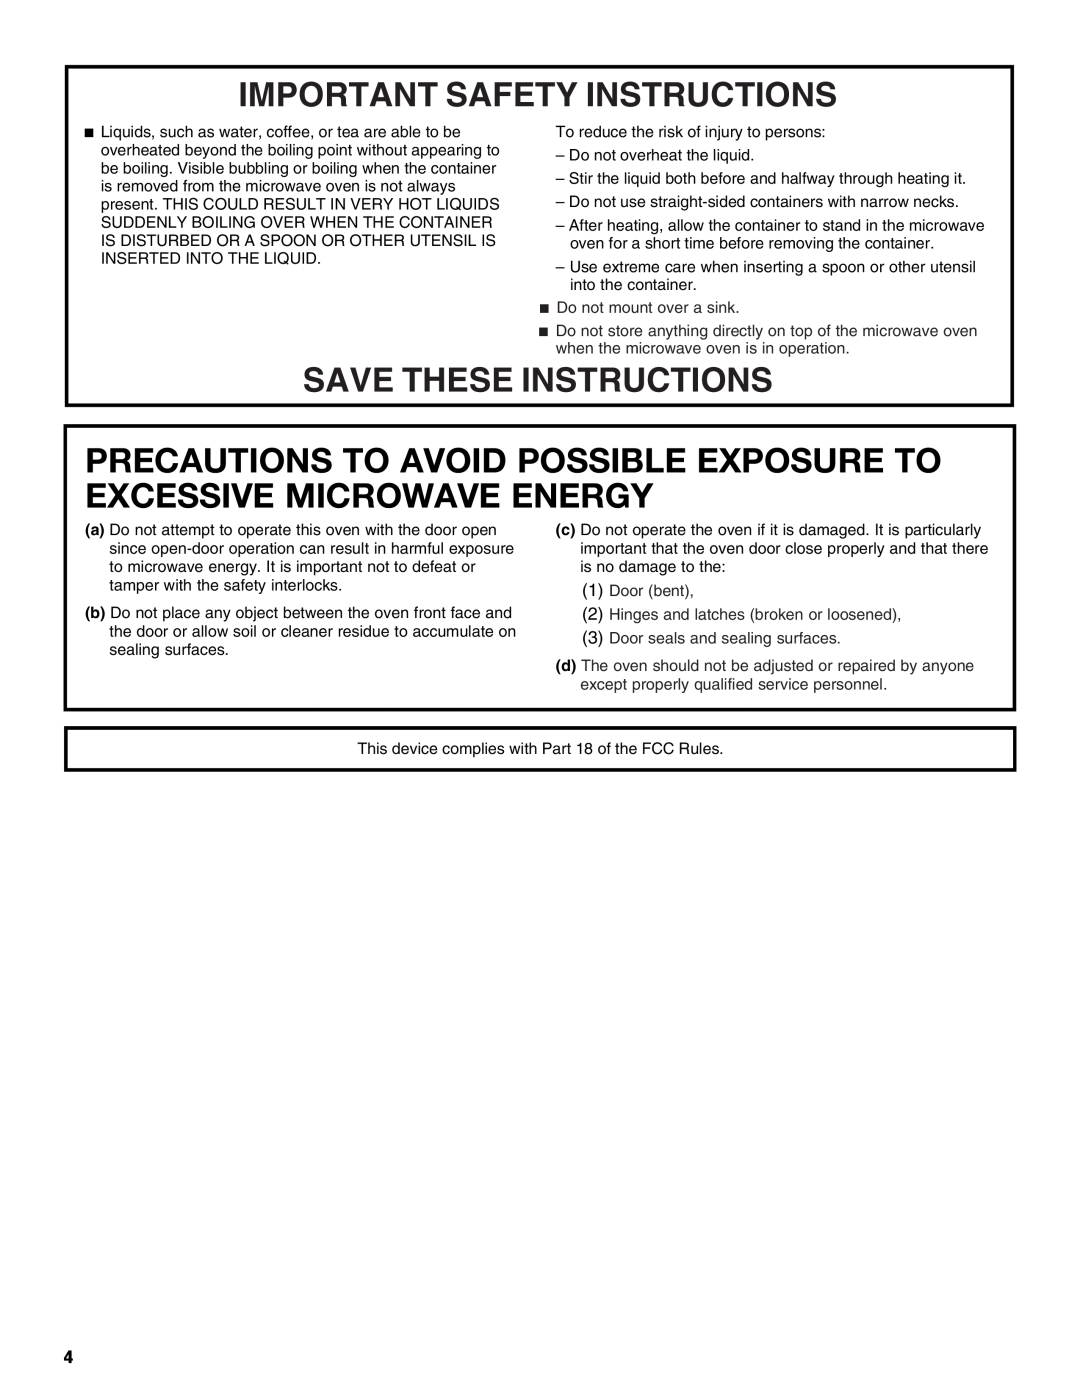 Whirlpool UMC5165 Precautions To Avoid Possible Exposure To Excessive Microwave Energy, Important Safety Instructions 